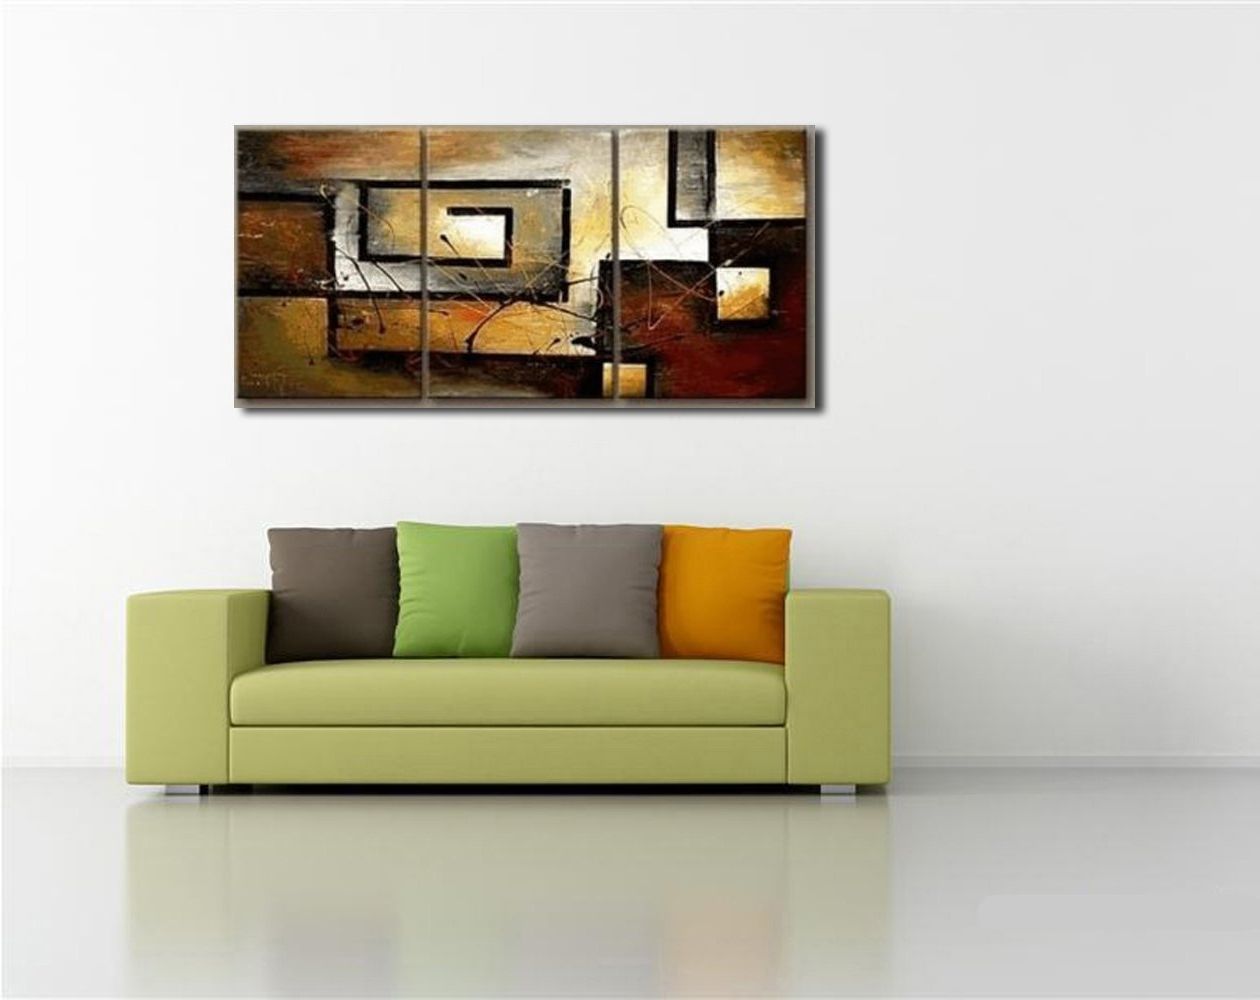 [%amazon: Mon Art 100% Hand Painted Oil Painting Abstract Art Intended For Current 3 Piece Wall Art|3 Piece Wall Art In Most Recently Released Amazon: Mon Art 100% Hand Painted Oil Painting Abstract Art|2017 3 Piece Wall Art In Amazon: Mon Art 100% Hand Painted Oil Painting Abstract Art|well Known Amazon: Mon Art 100% Hand Painted Oil Painting Abstract Art For 3 Piece Wall Art%] (View 4 of 15)